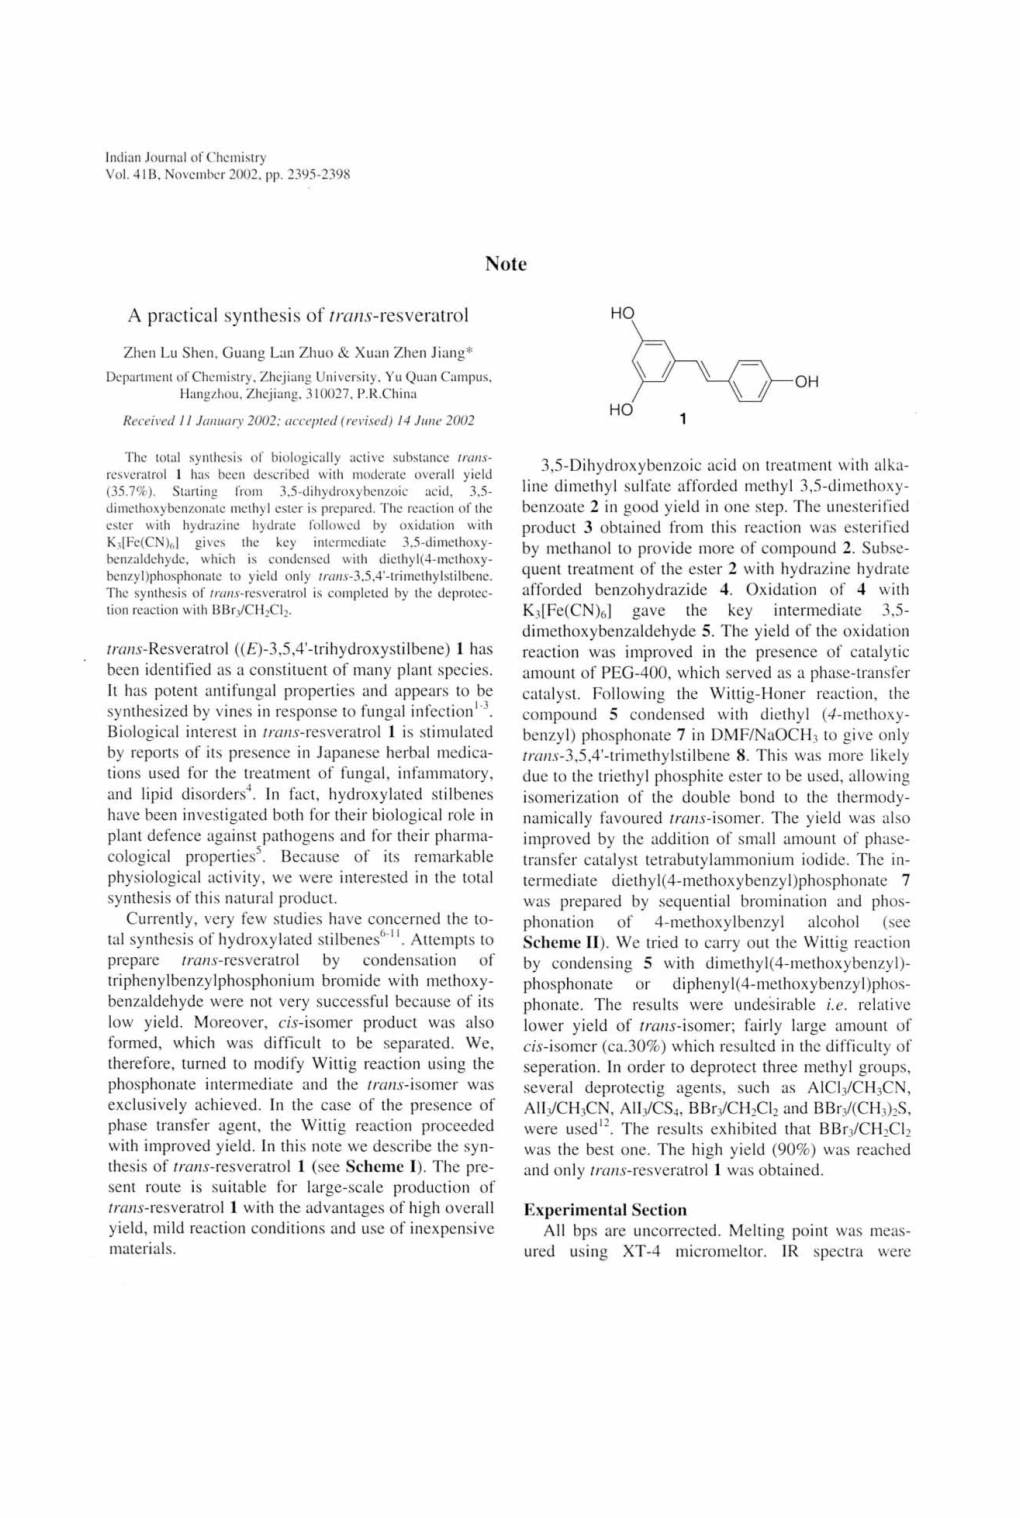 A Practical Synthesis of Lrans-Resveratrol